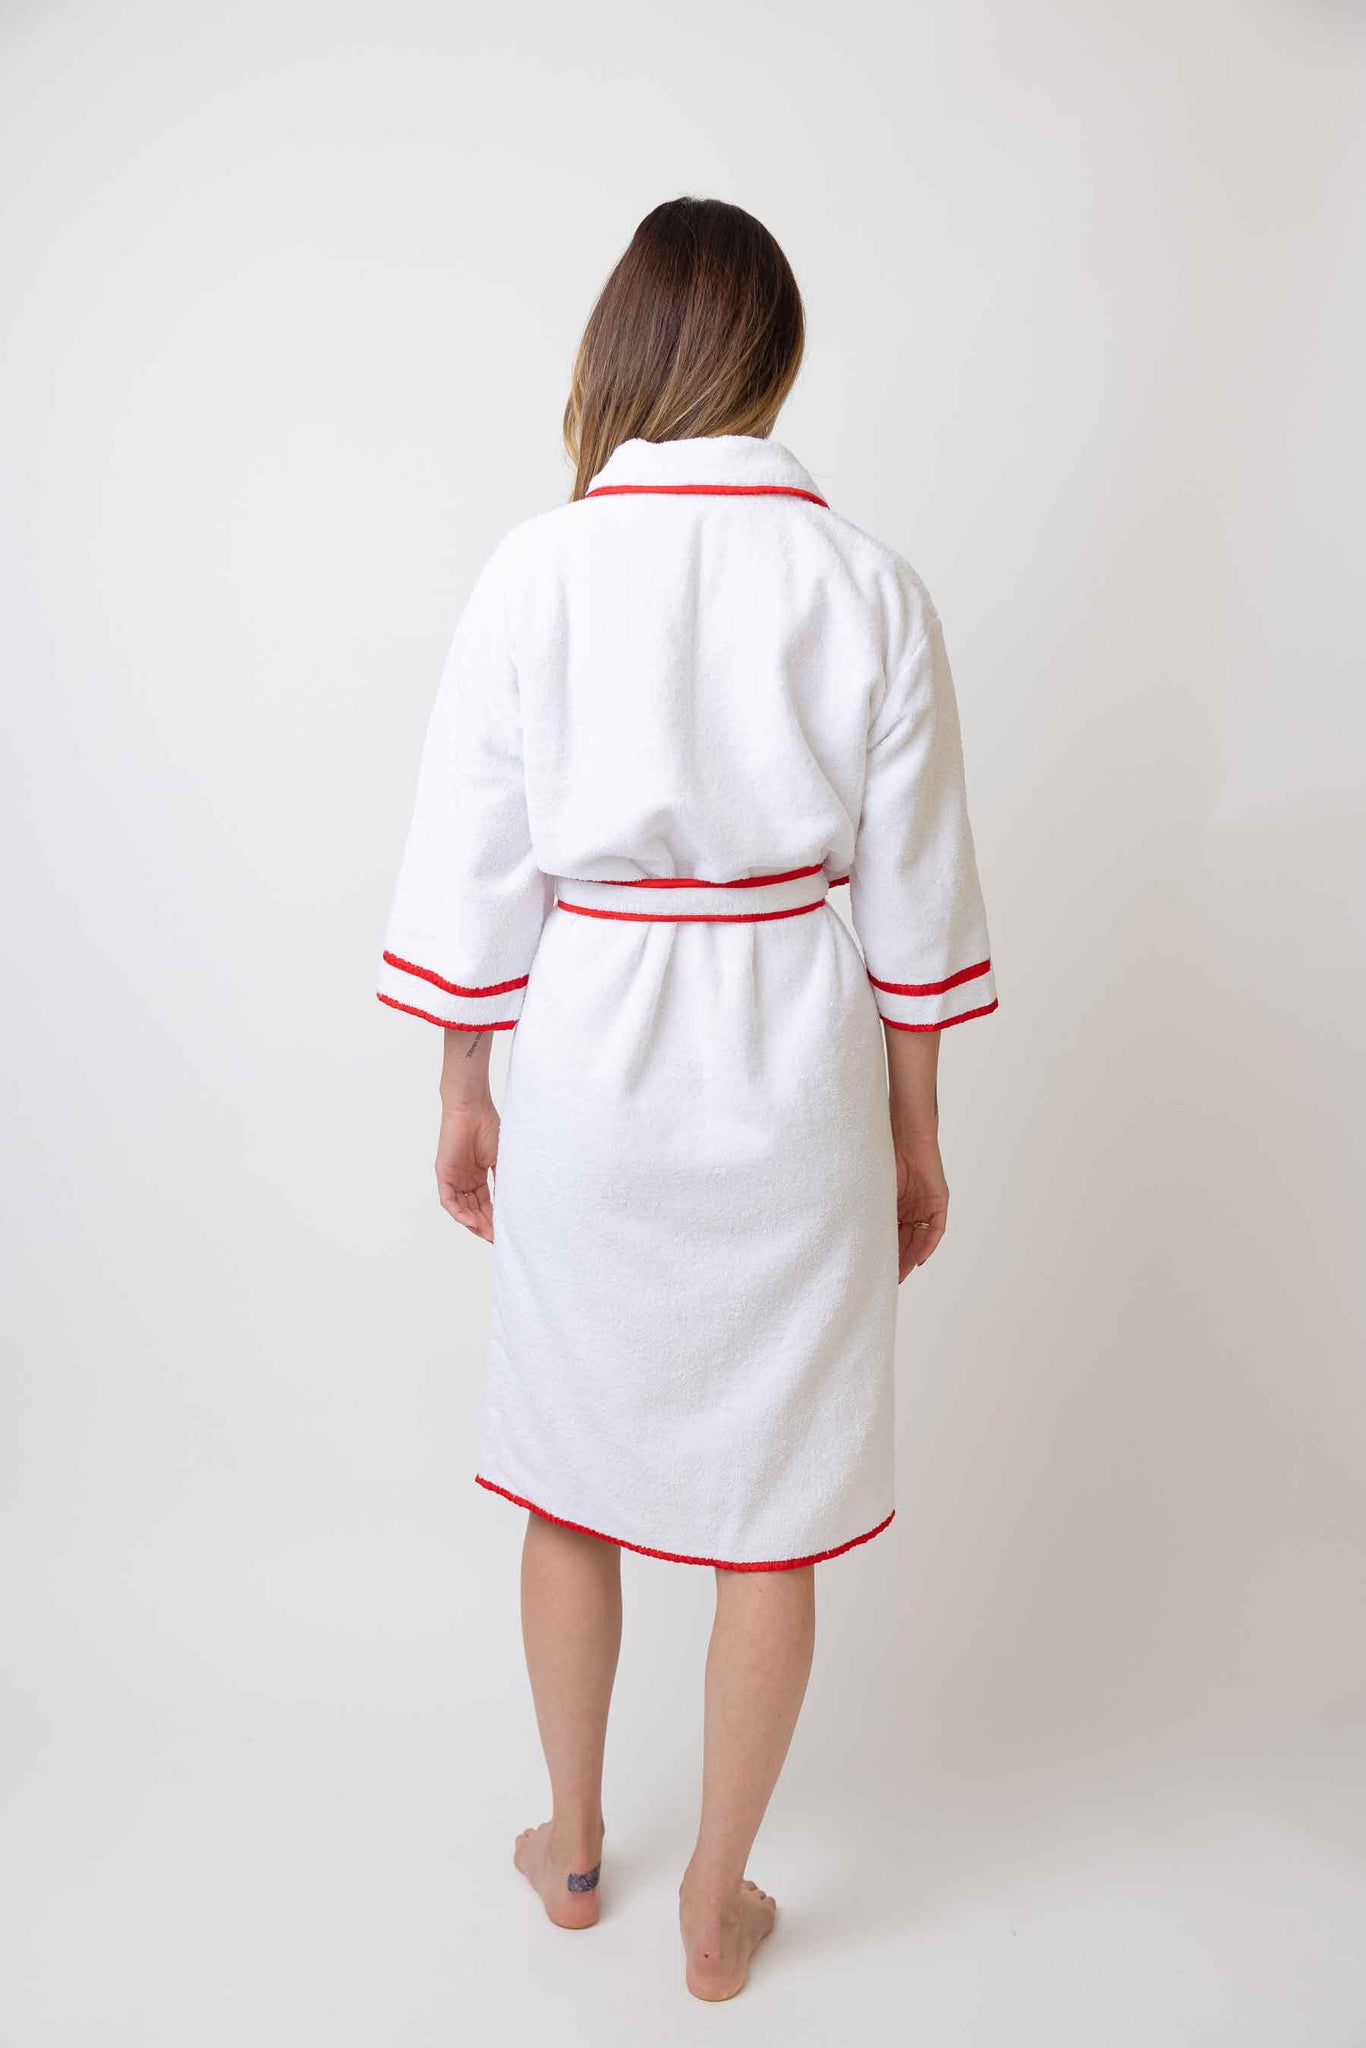 The back of The Happily Eva After Collection Roberta Bathrobe